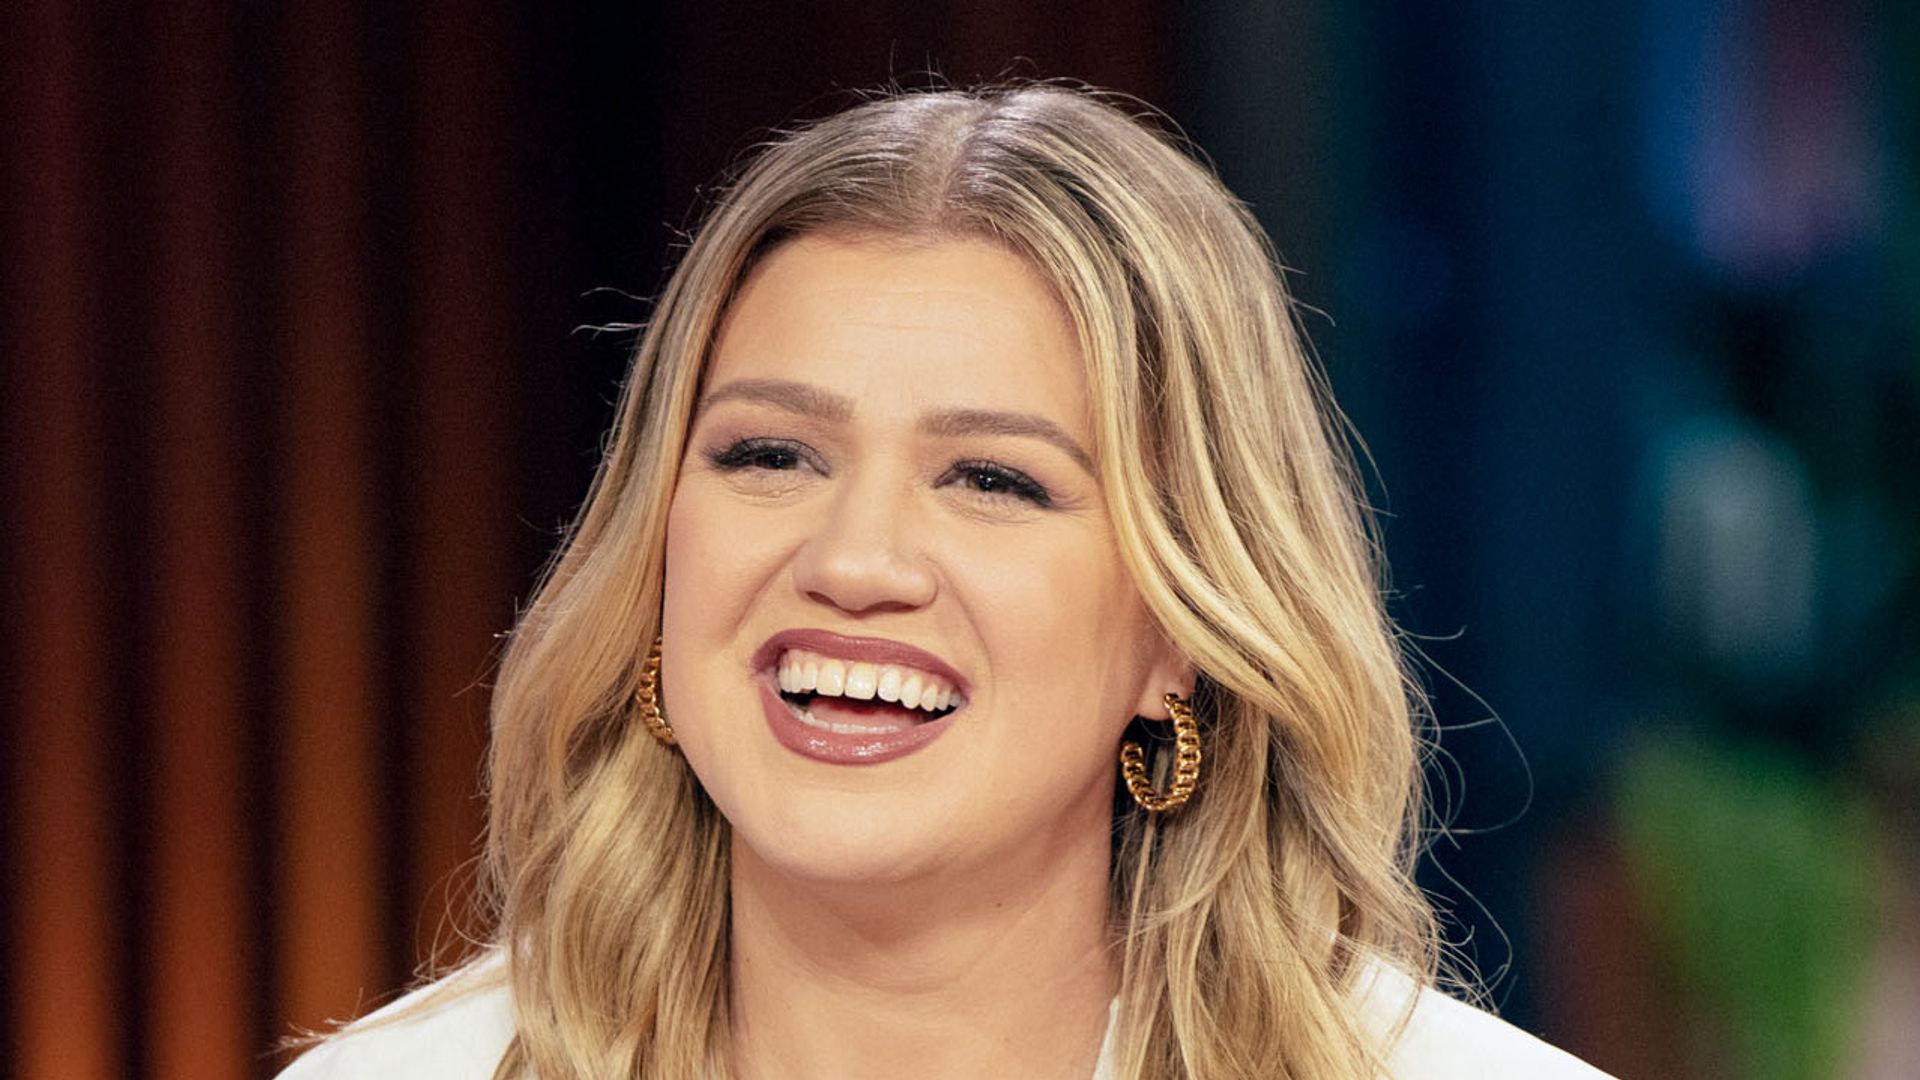 Kelly Clarkson's incredible weight loss transformation: her secrets revealed